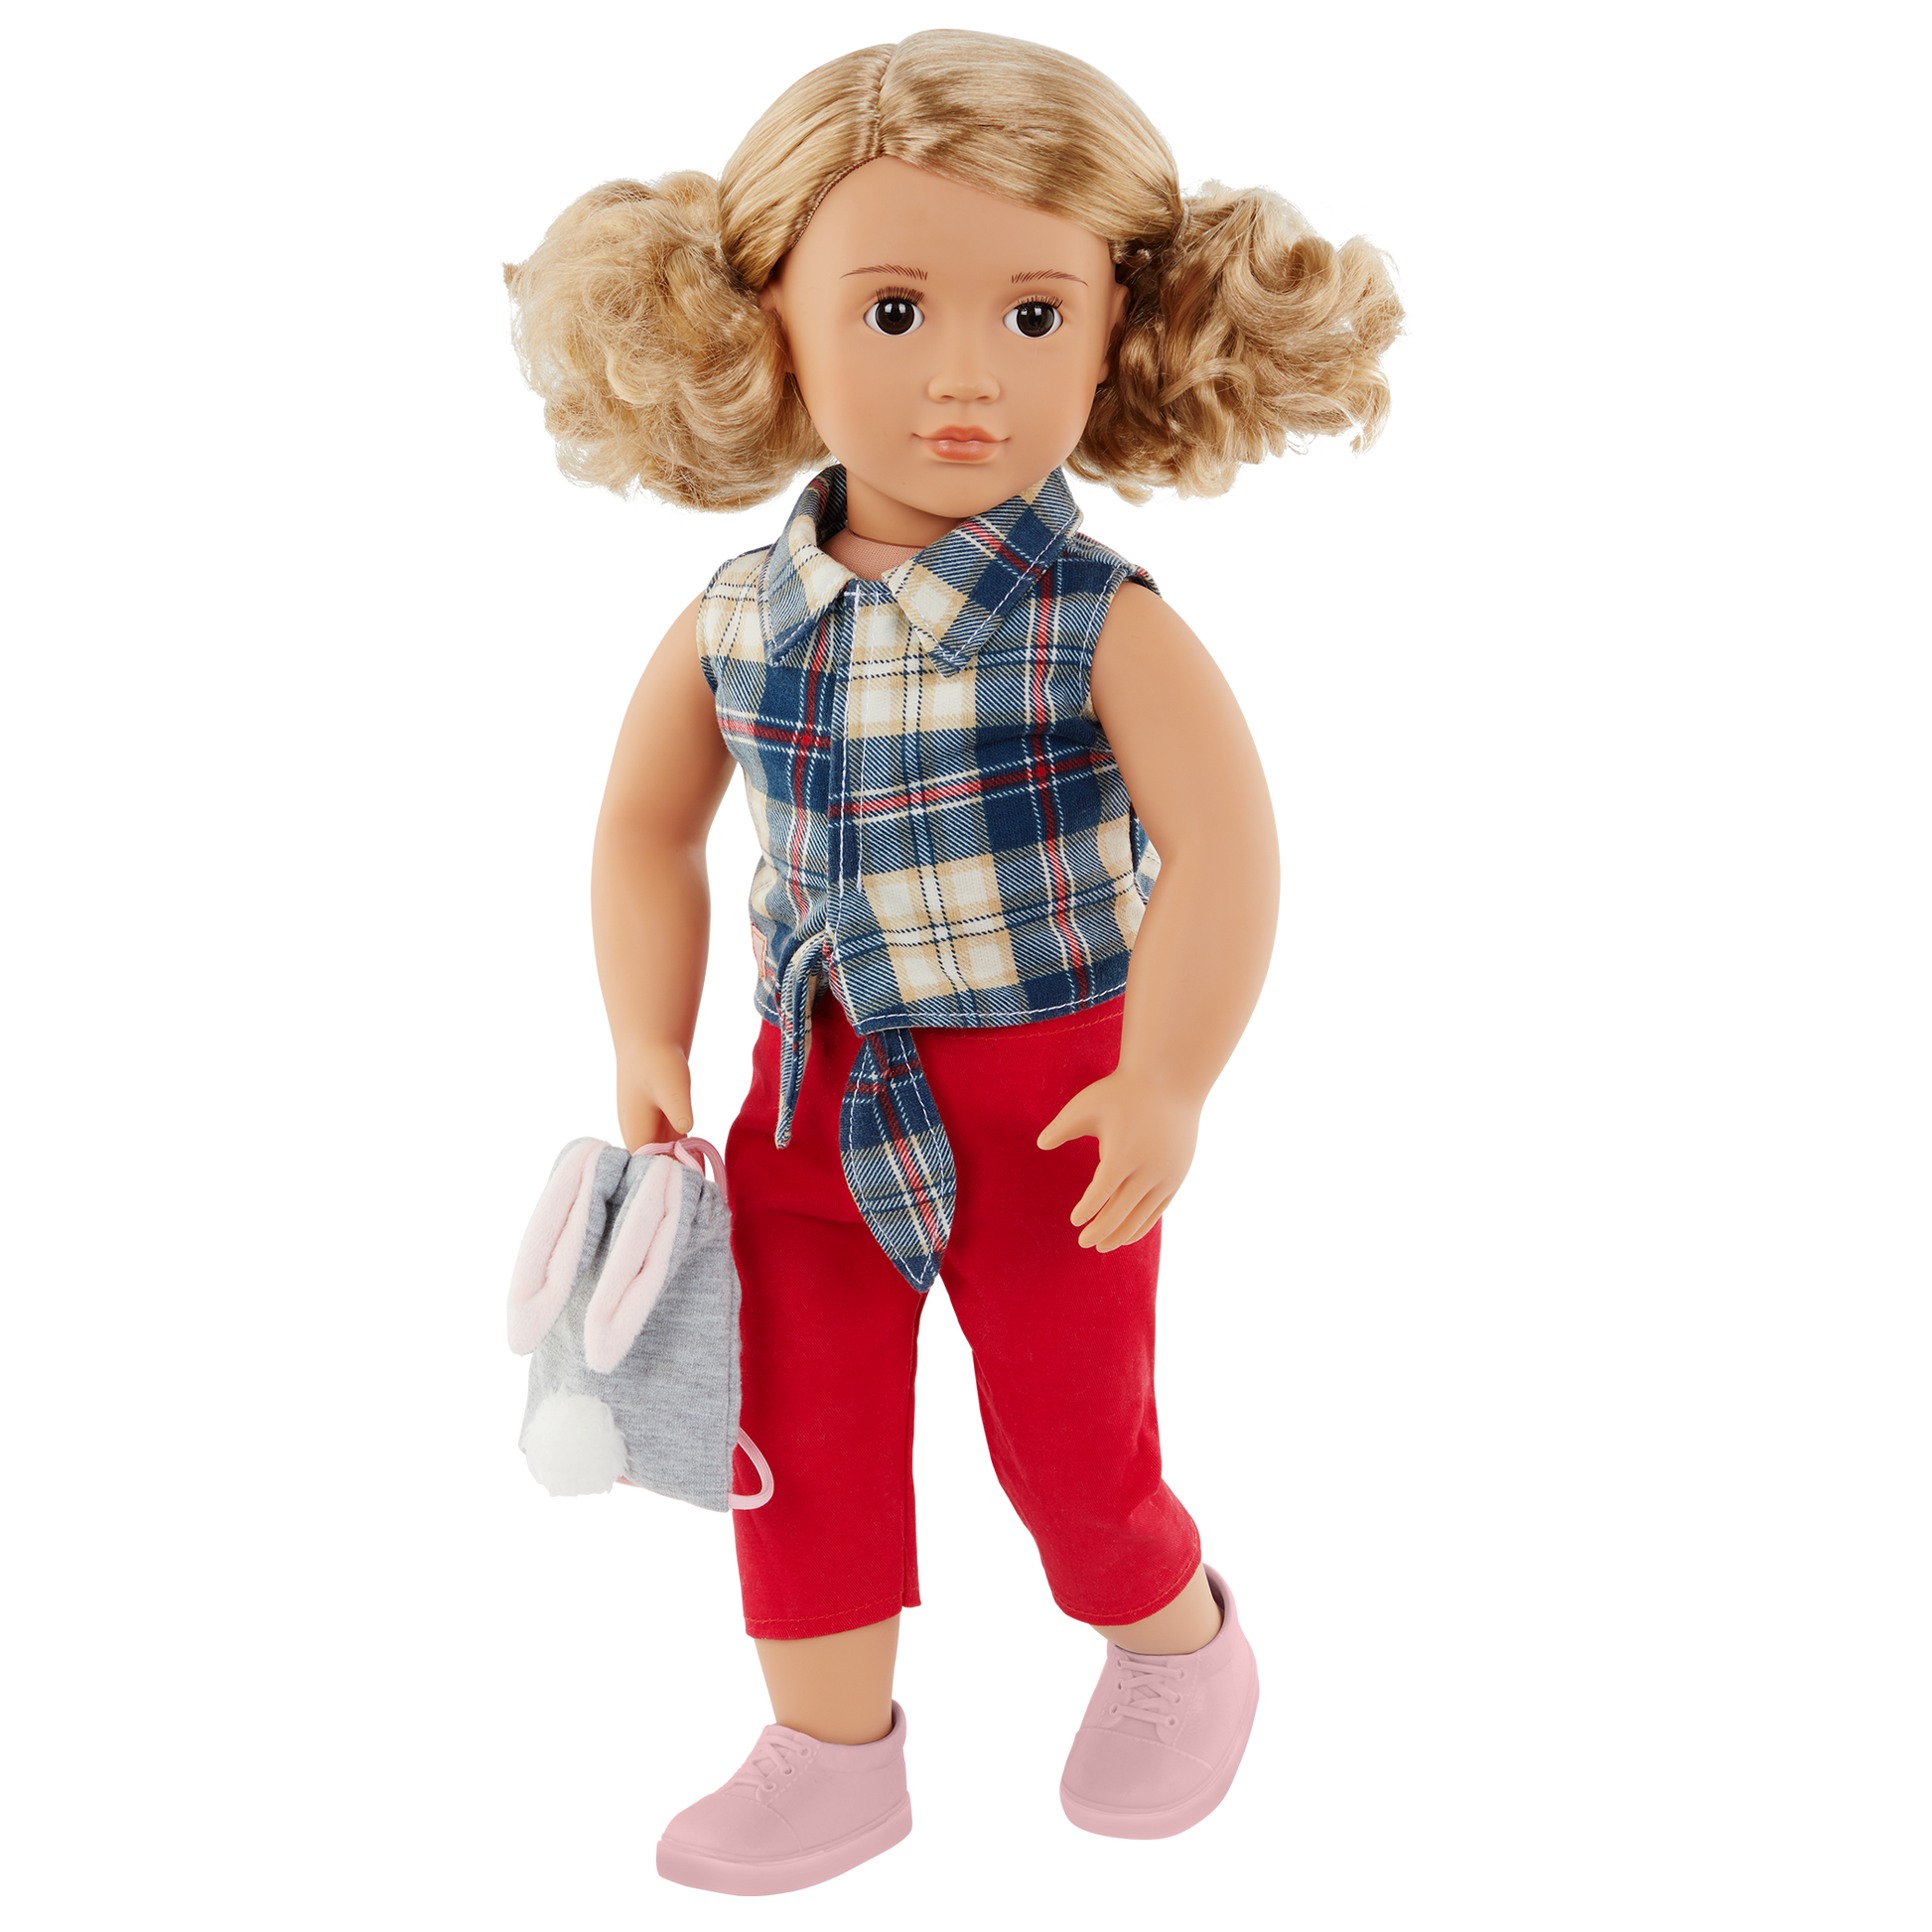 Our Generation Regular Outfit - Denim & Plaid Shirt with Bunny Purse Outfit The Toy Wagon